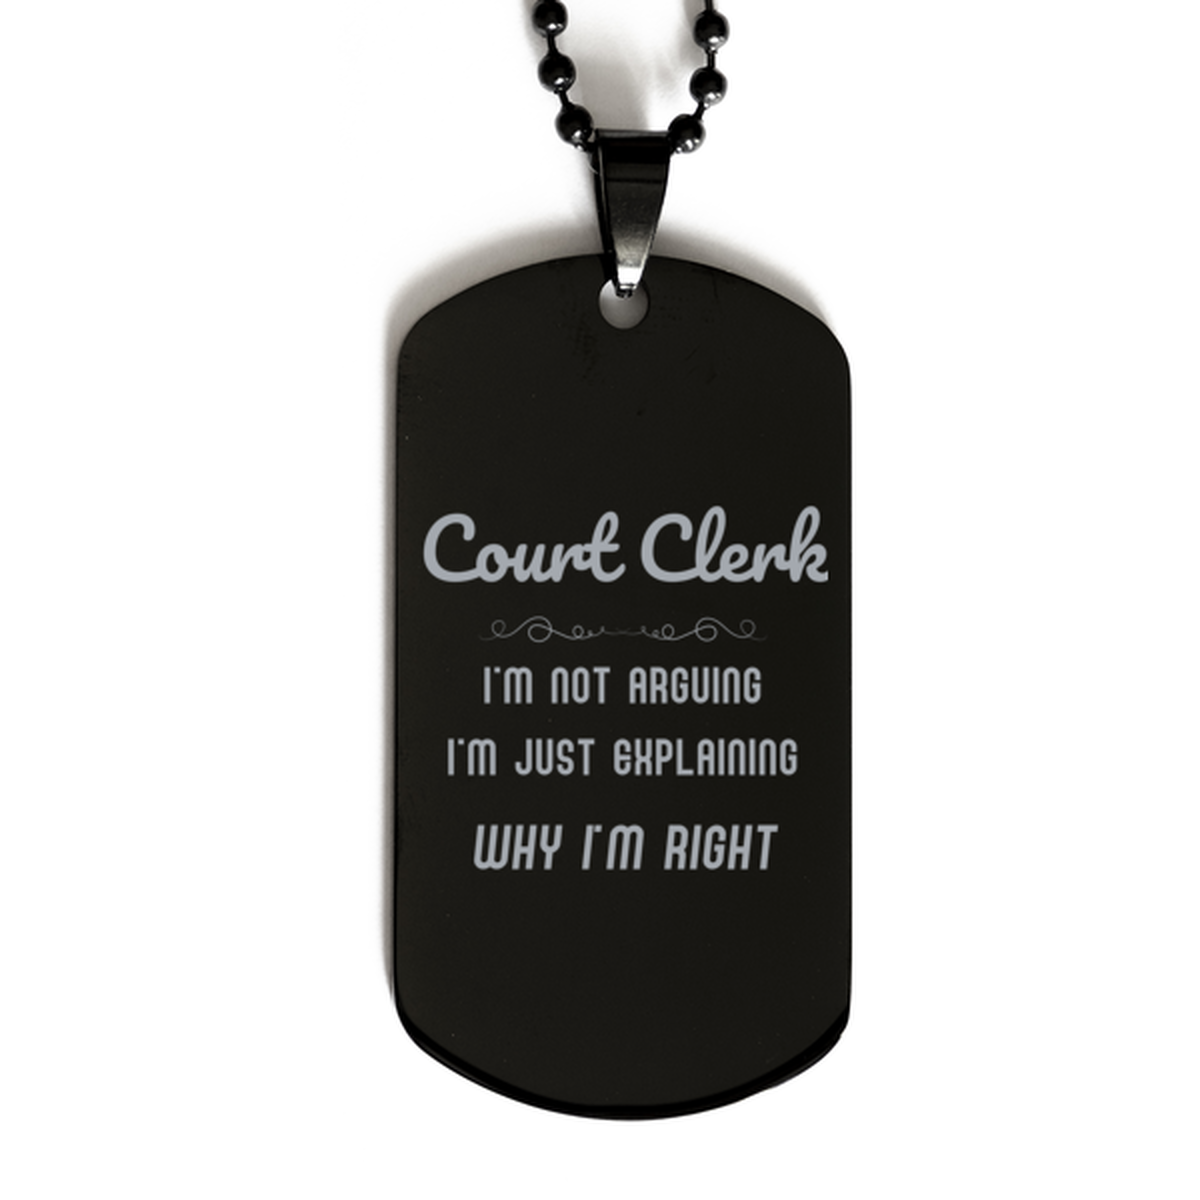 Court Clerk I'm not Arguing. I'm Just Explaining Why I'm RIGHT Black Dog Tag, Funny Saying Quote Court Clerk Gifts For Court Clerk Graduation Birthday Christmas Gifts for Men Women Coworker